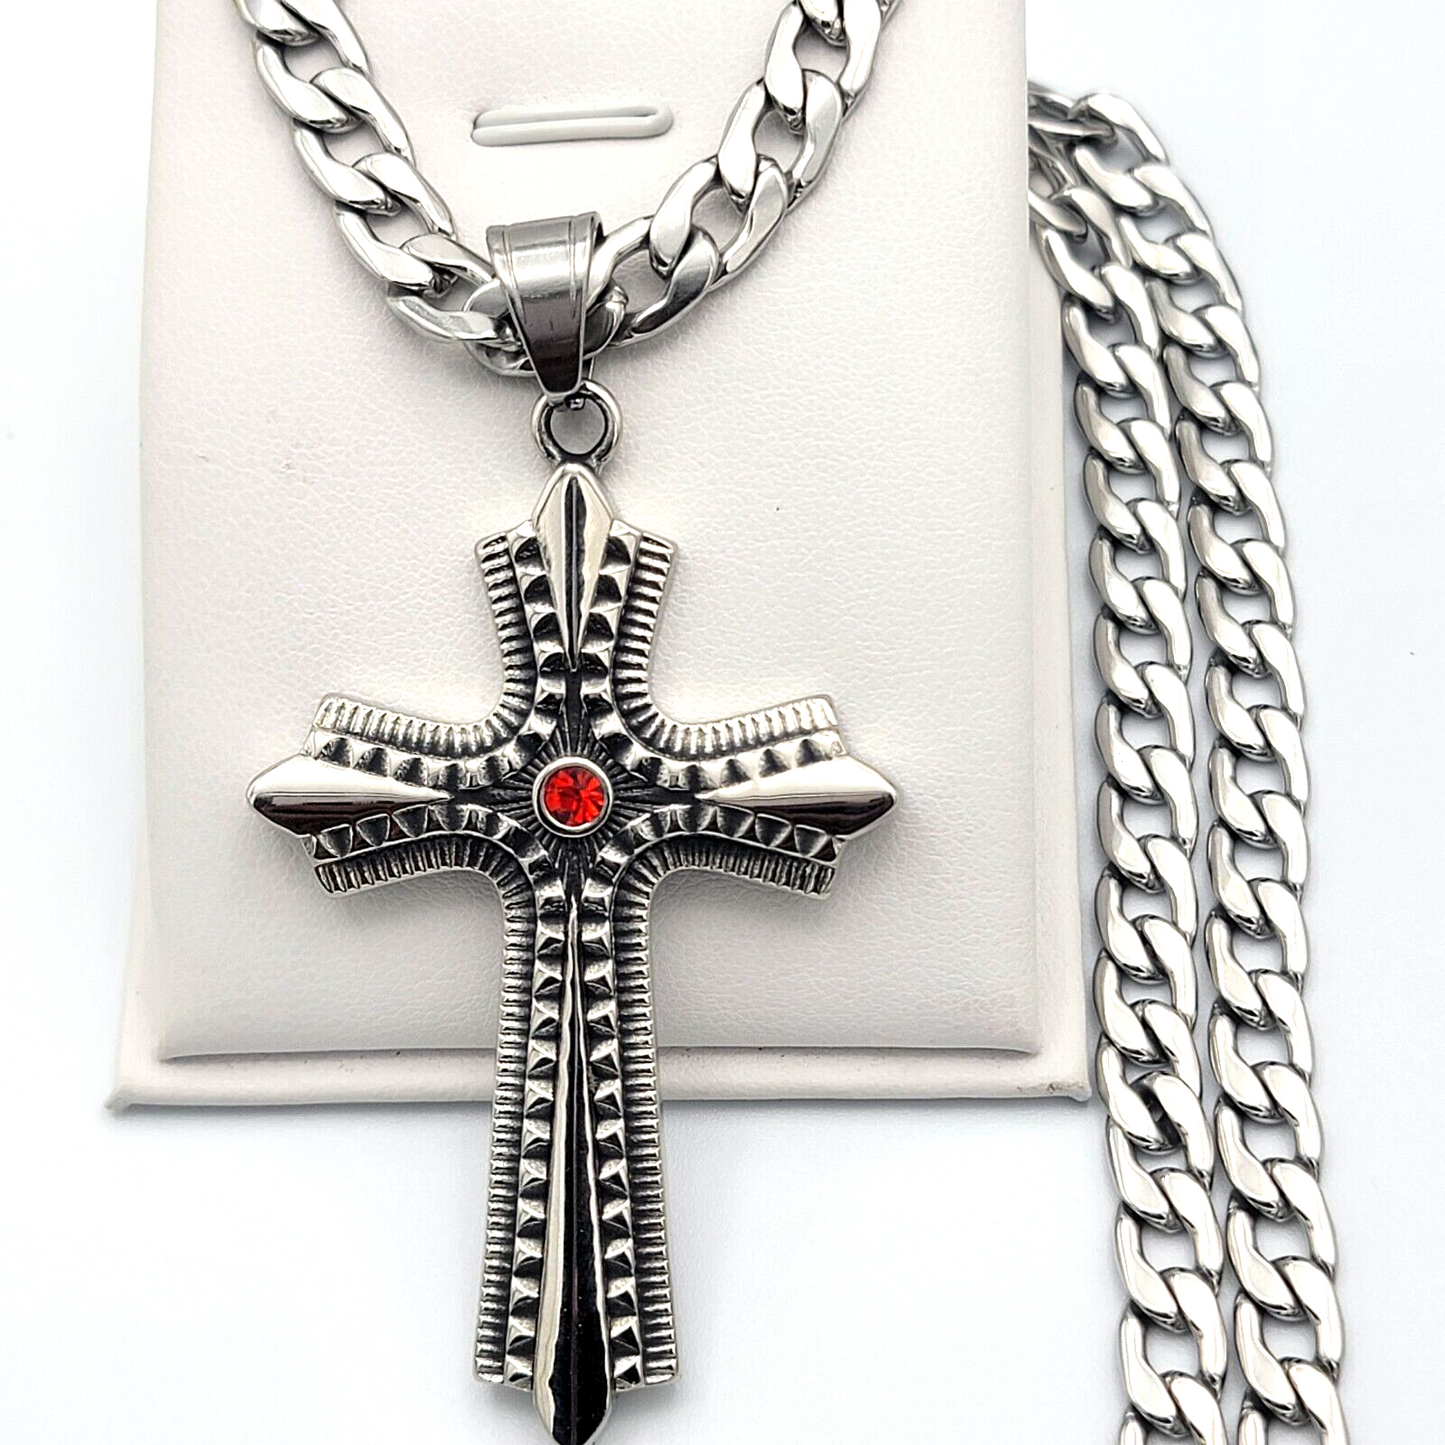 Necklaces - Stainless Steel. Celtic Cross Pendant & Chain. Red Crystal Center.